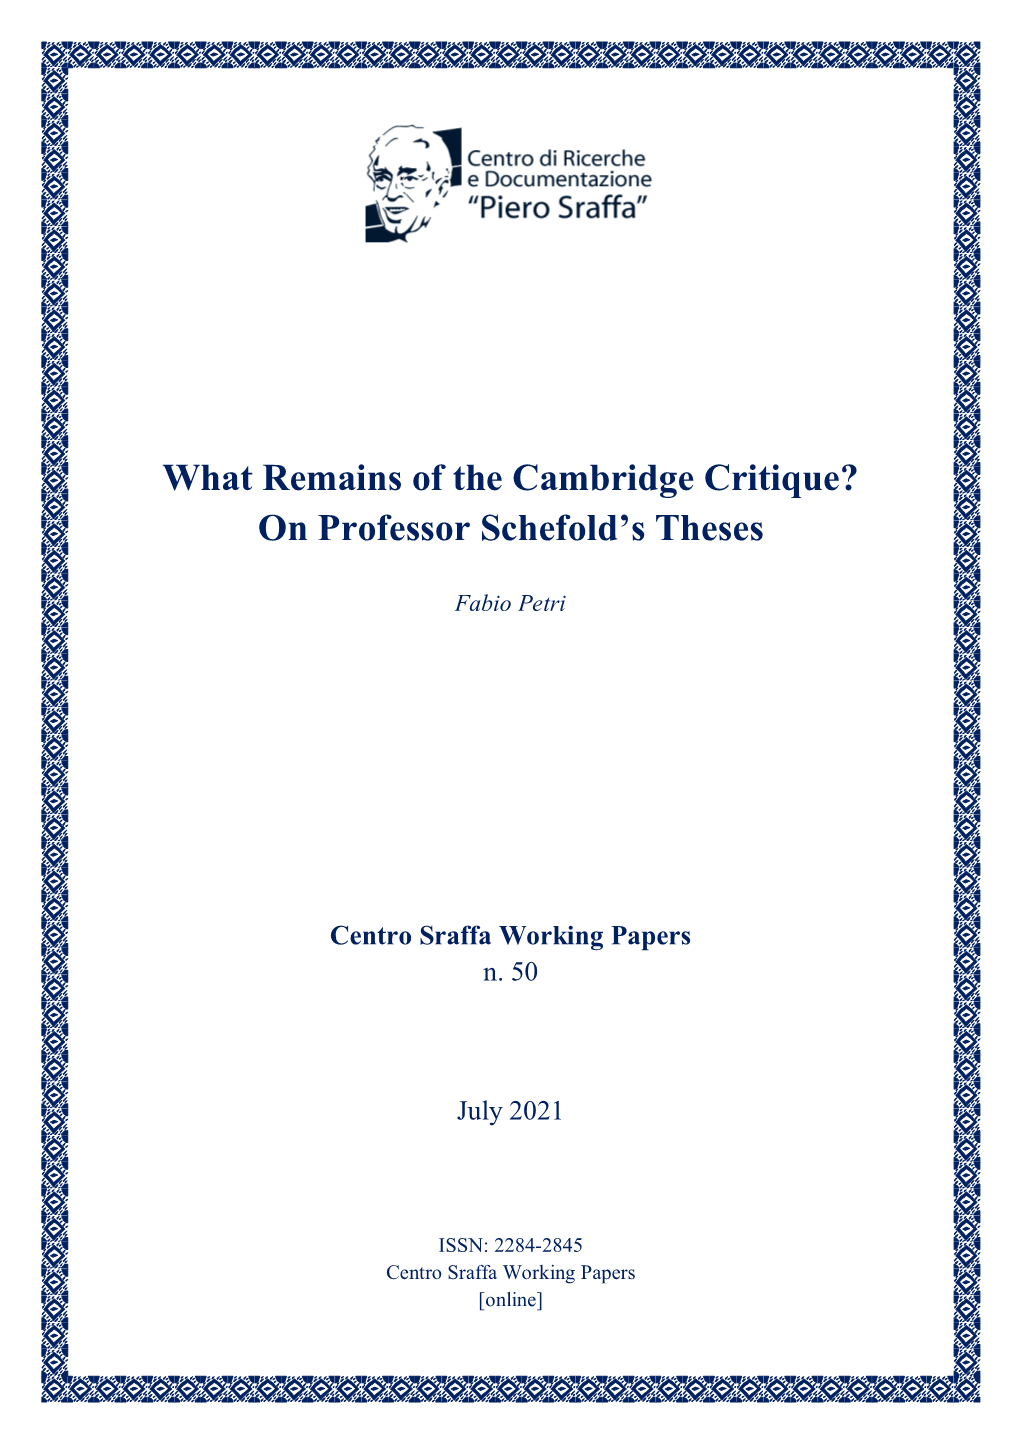 What Remains of the Cambridge Critique? on Professor Schefold's Theses